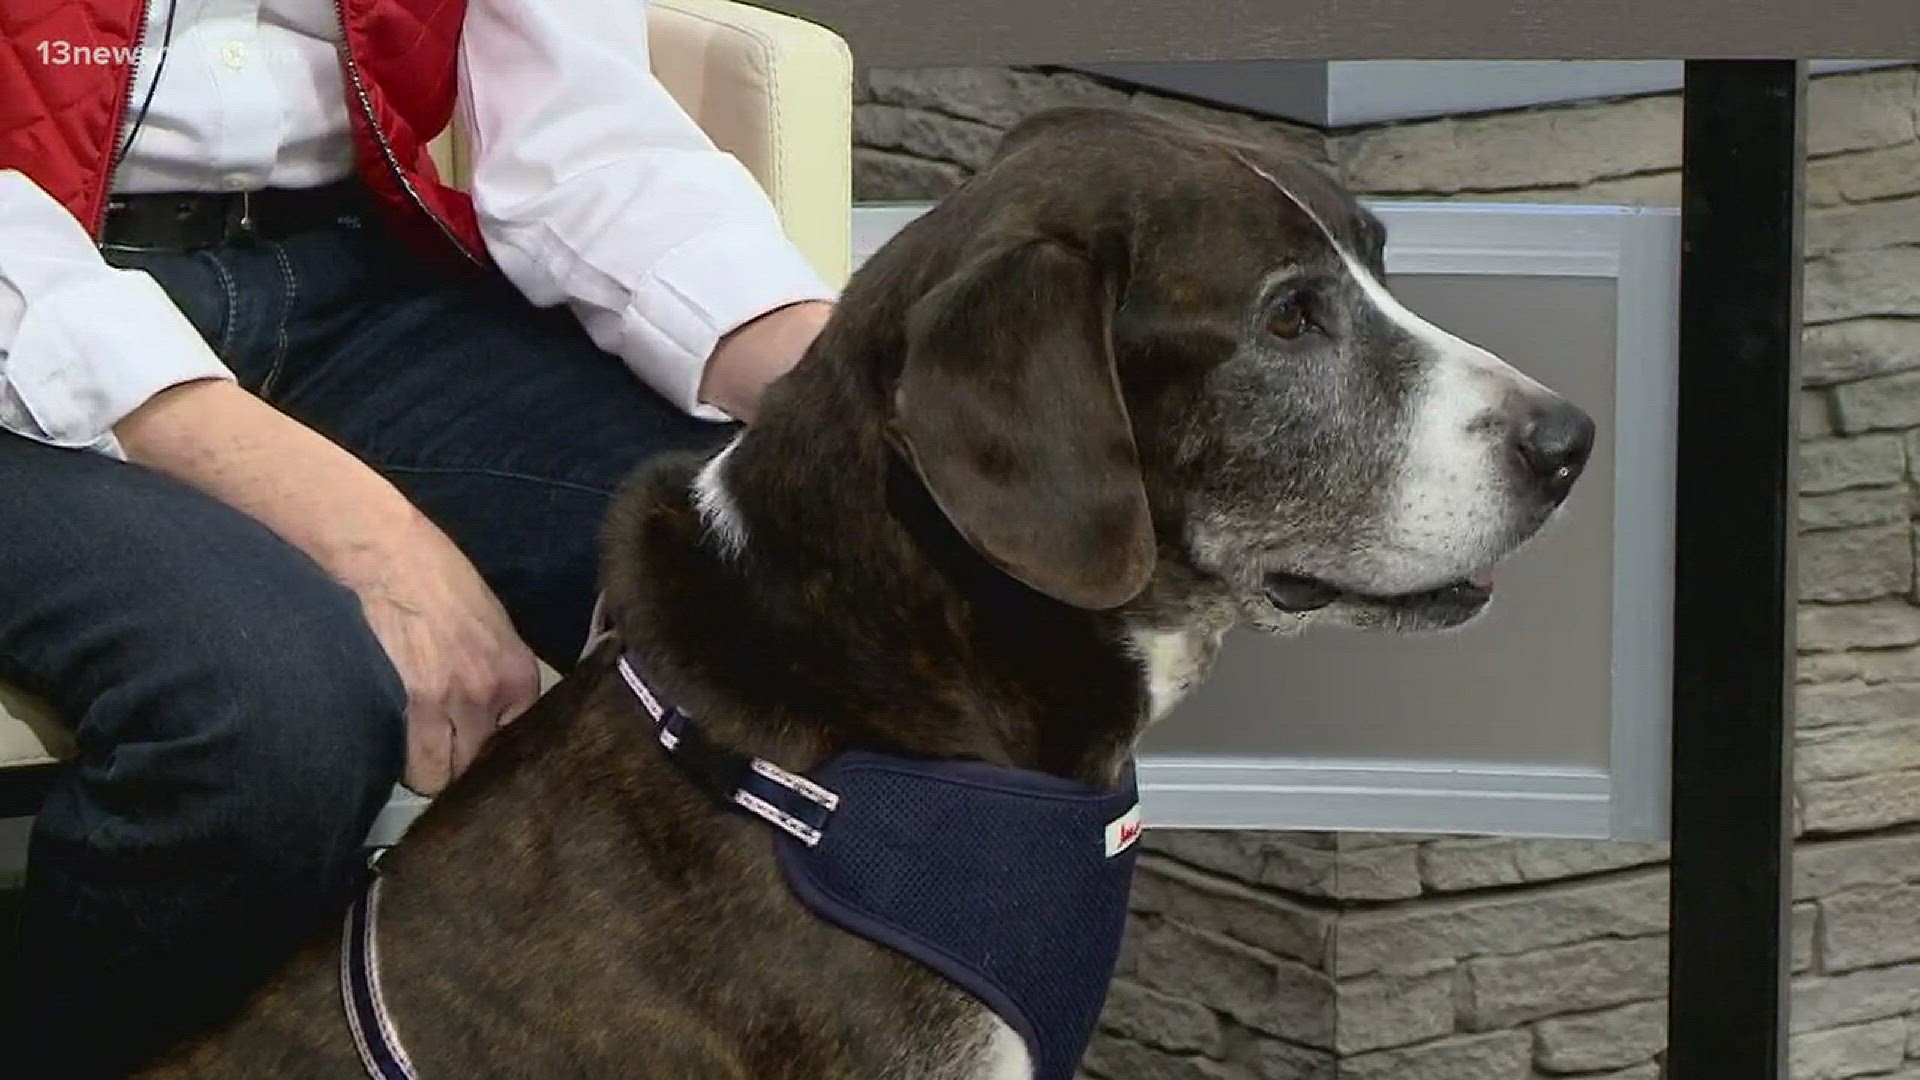 The Peninsula SPCA brought a special guest to the 13News Now studio to find him a forever home!